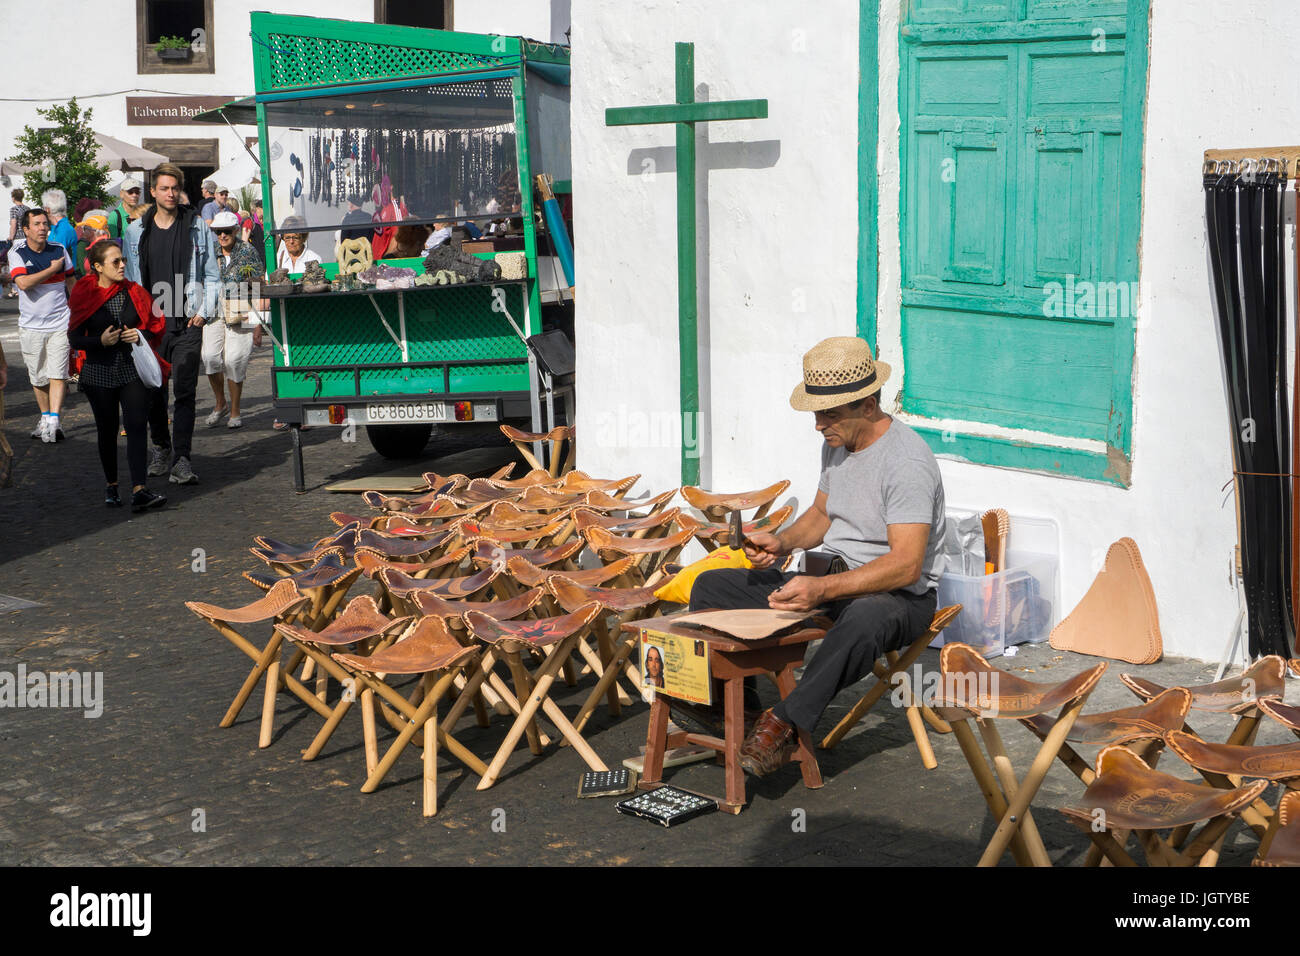 Canarian craftsman produces camp-chairs wit leather seats, weekly sunday market, Teguise, Lanzarote island, Canary islands, Spain, Europe Stock Photo